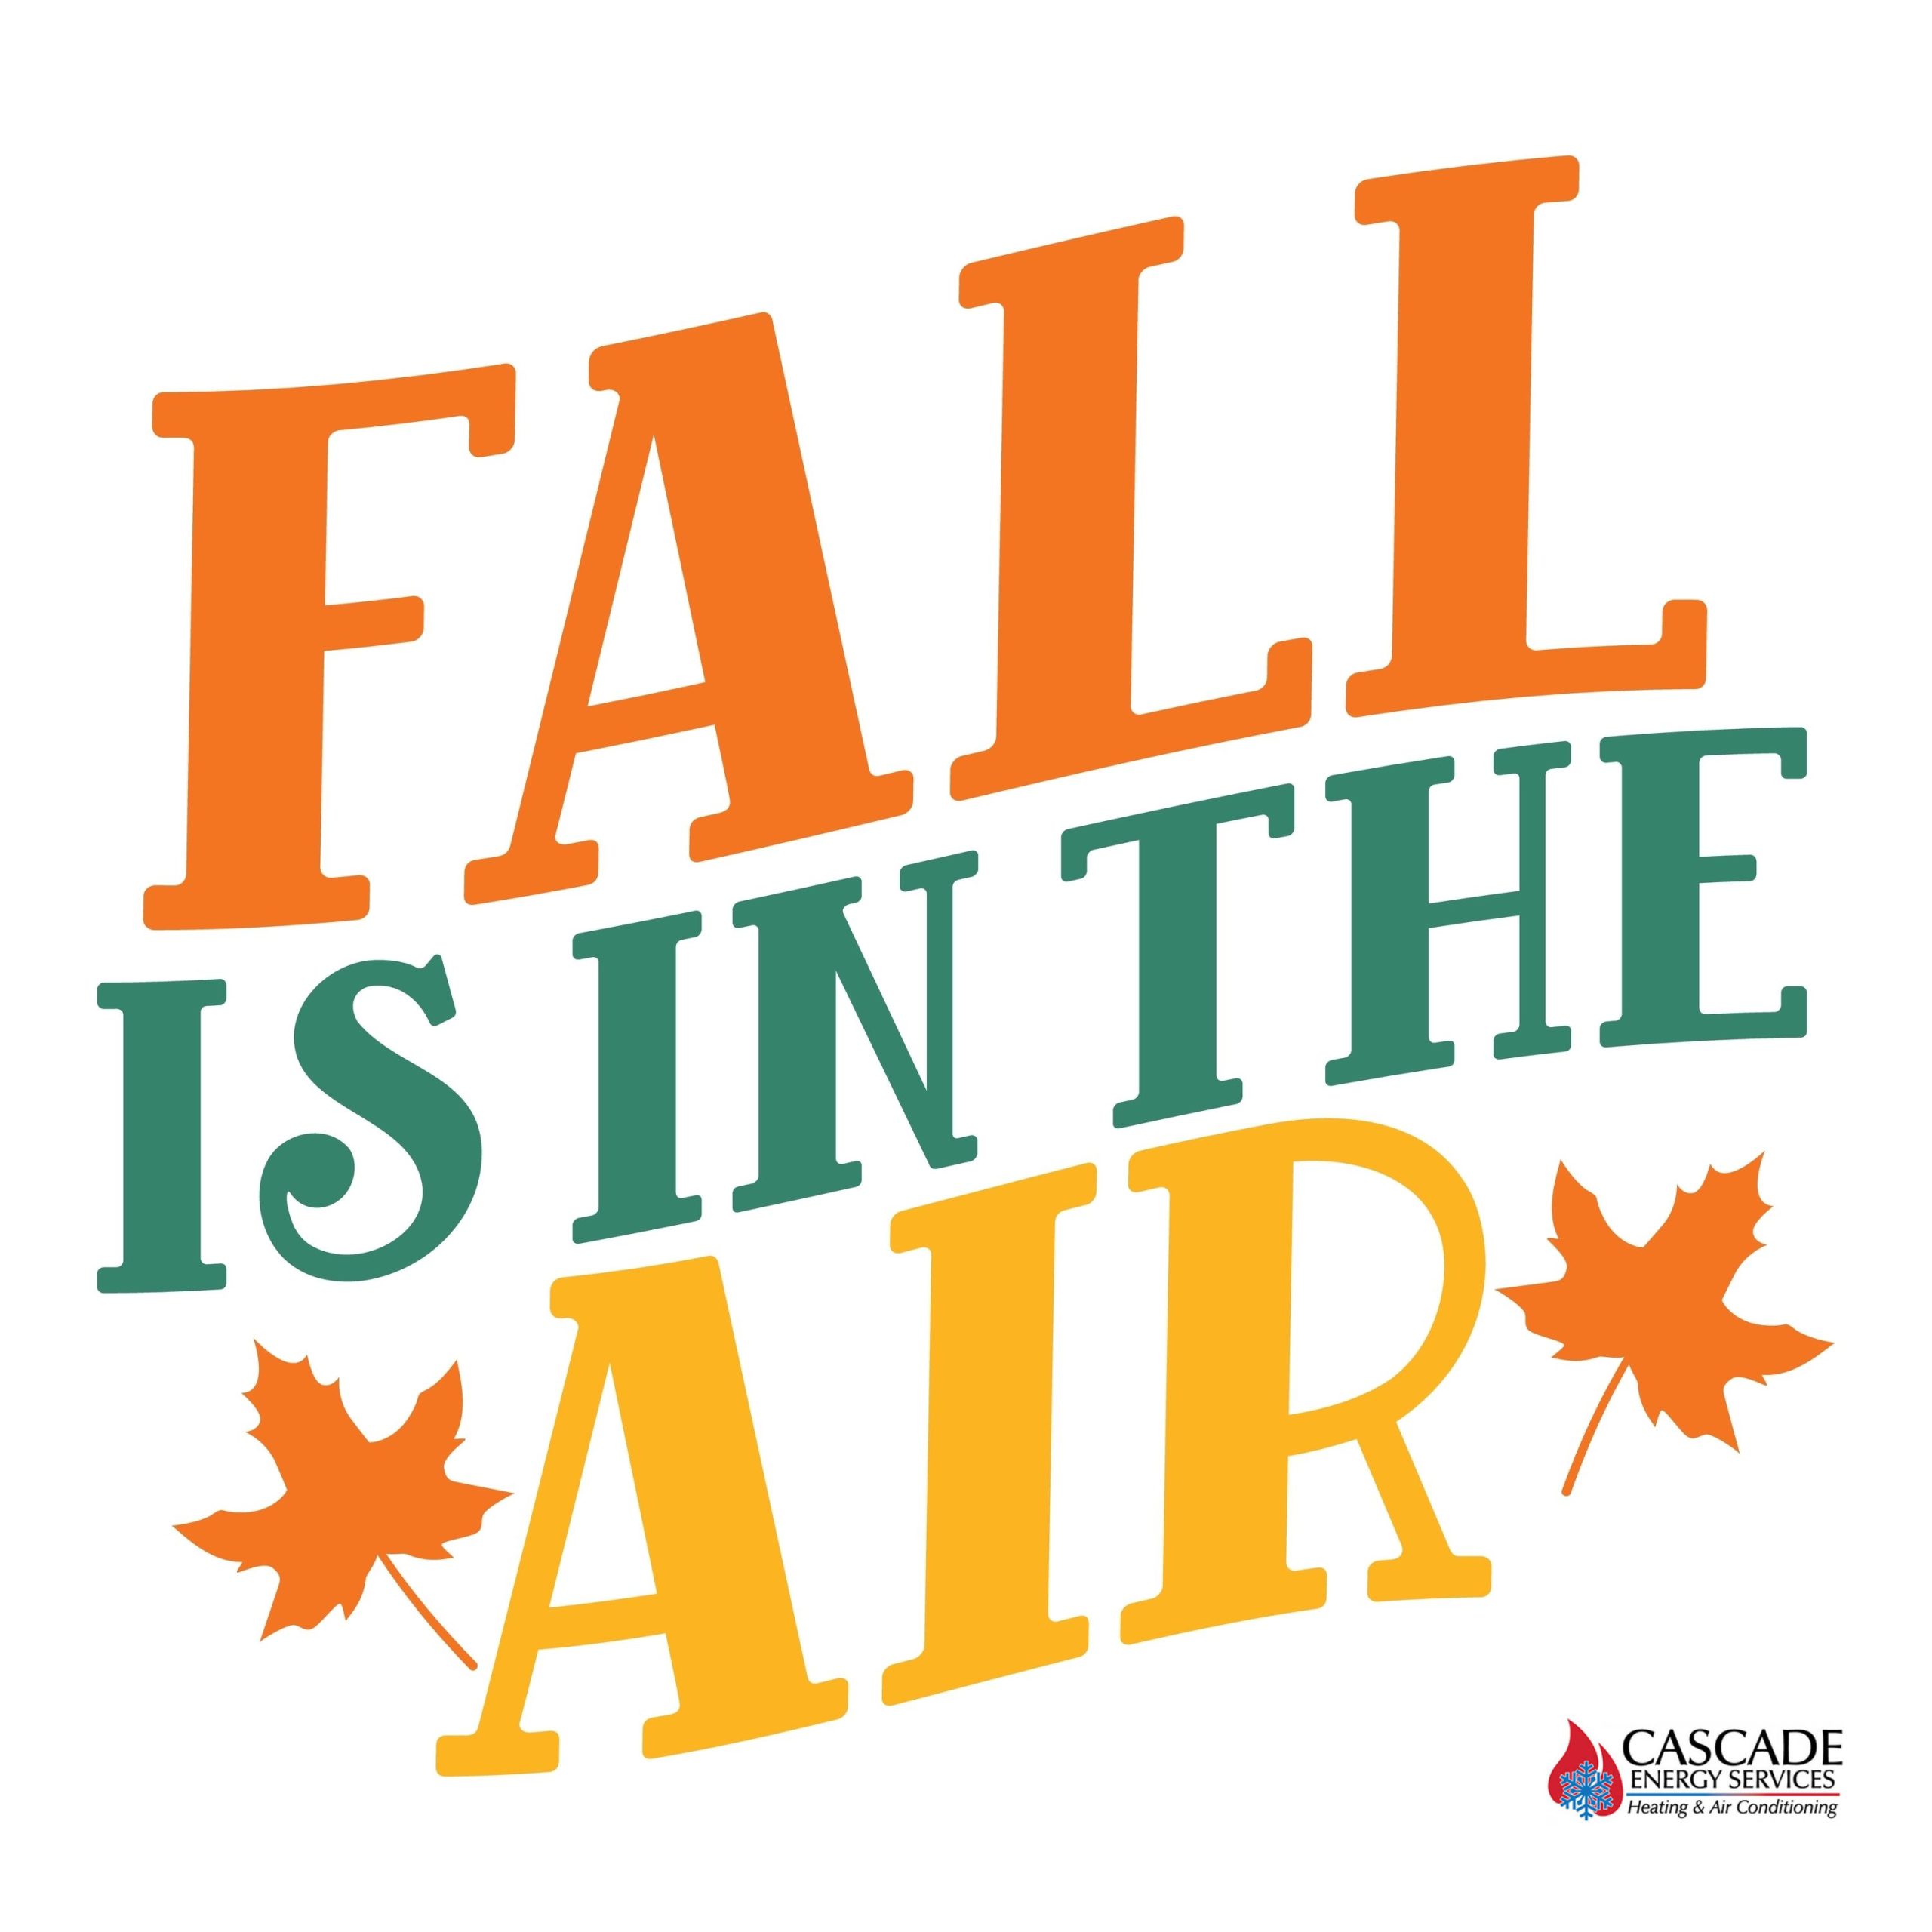 How to Prepare Your Home for Fall: HVAC Tune-up & Preventative Maintenance